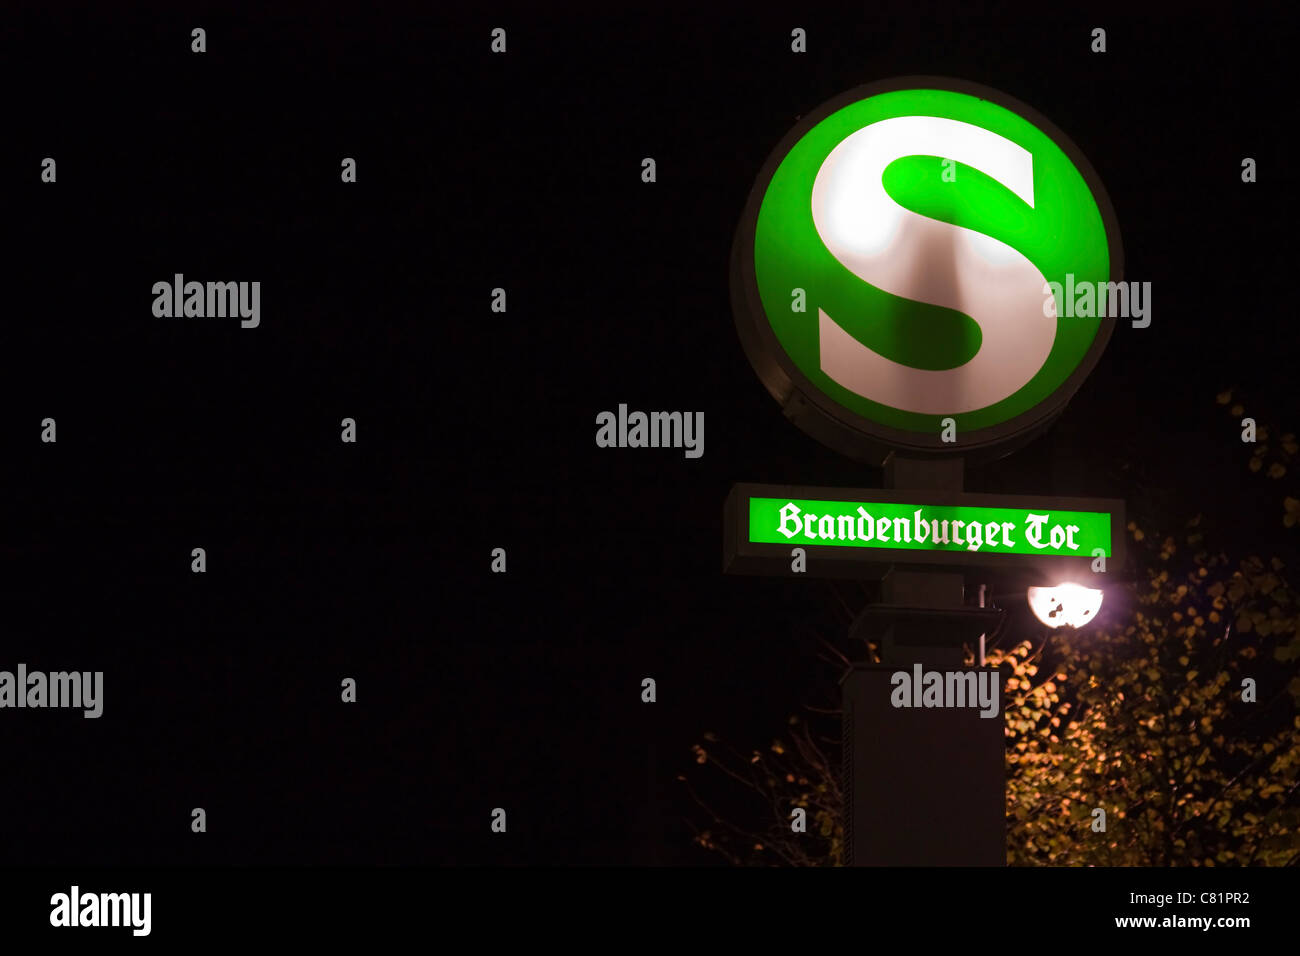 Image taken at night of an Surface rail station sign of the Brandenburg Gate in Berlin in October 2010. Stock Photo